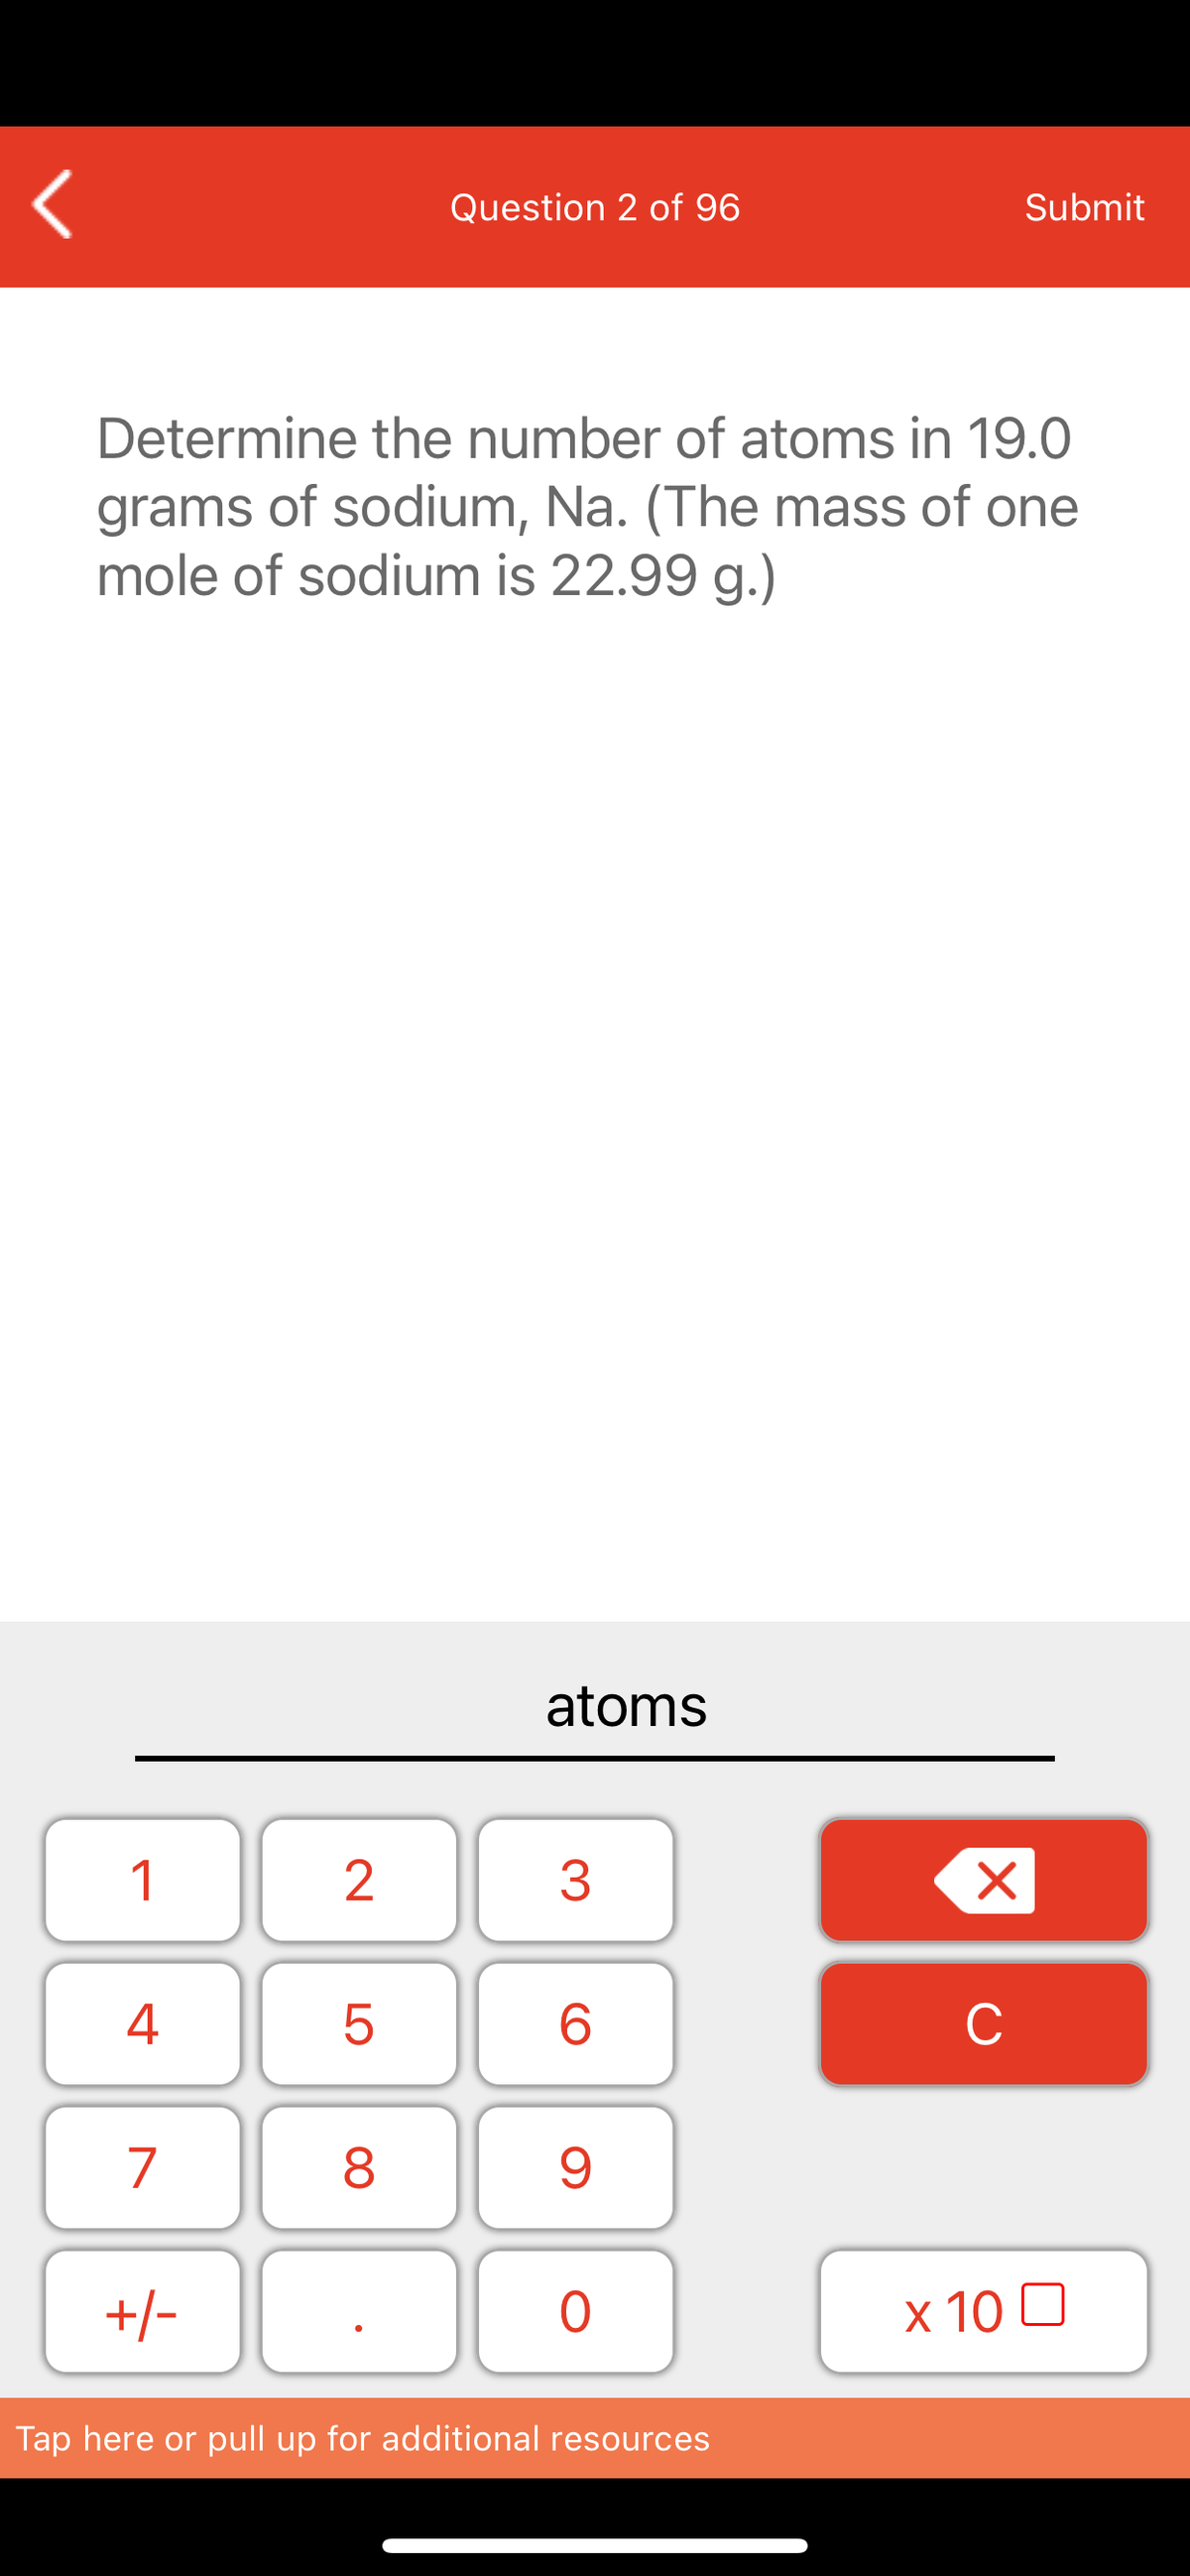 Question 2 of 96
Submit
Determine the number of atoms in 19.0
grams of sodium, Na. (The mass of one
mole of sodium is 22.99 g.)
atoms
1
2
4
6.
C
7
+/-
x 10 0
Tap here or pull up for additional resources
LO
00
